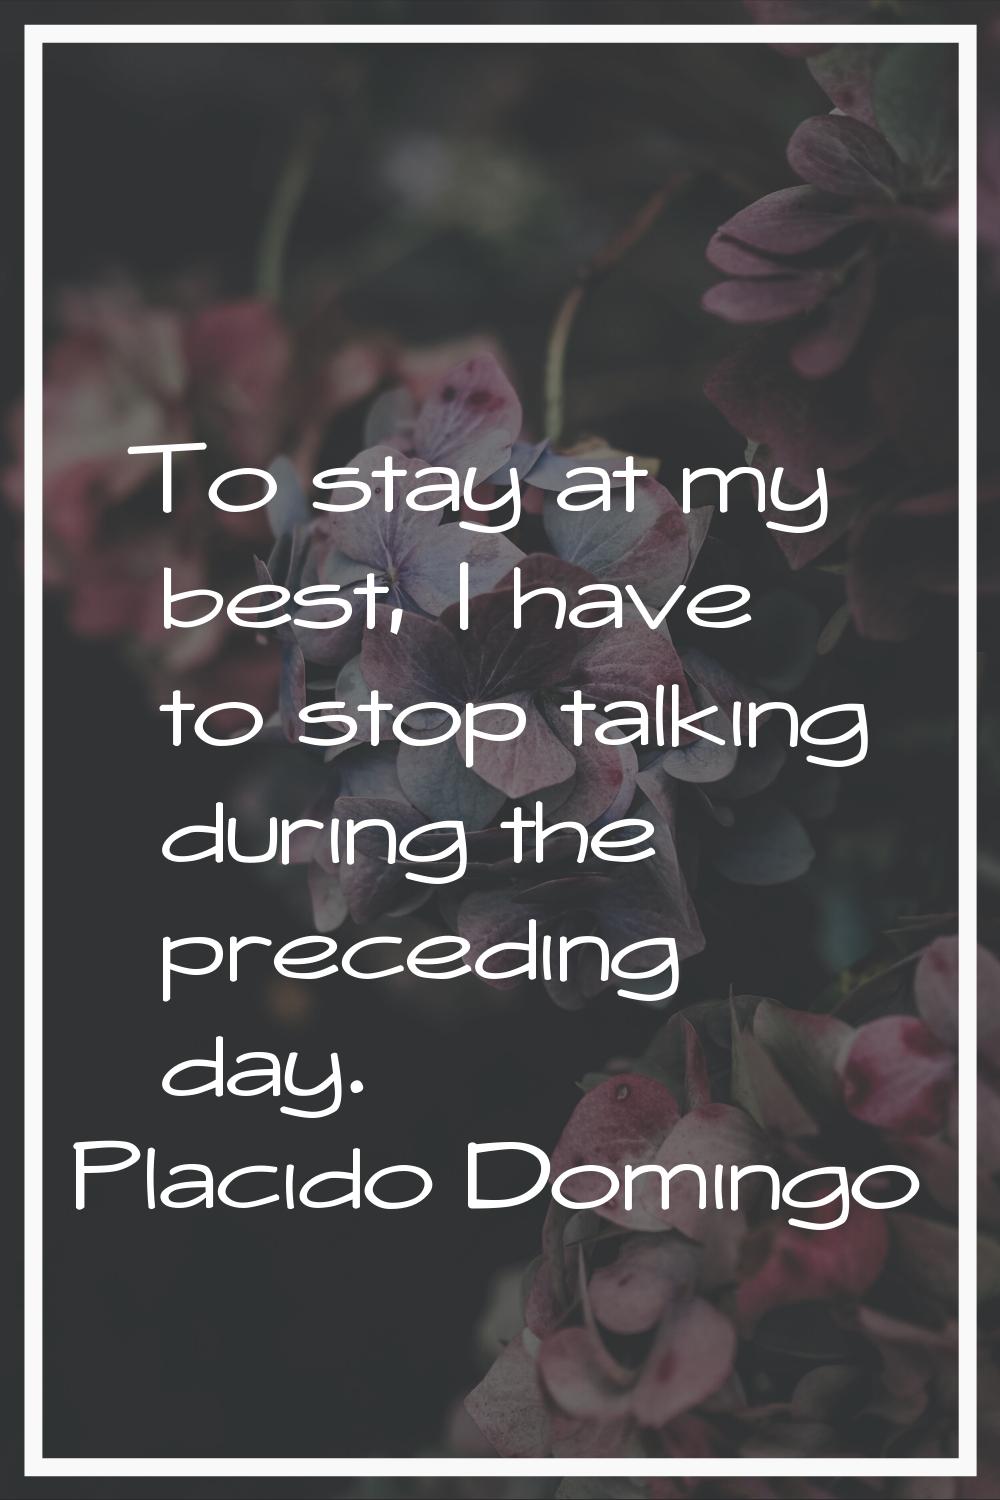 To stay at my best, I have to stop talking during the preceding day.